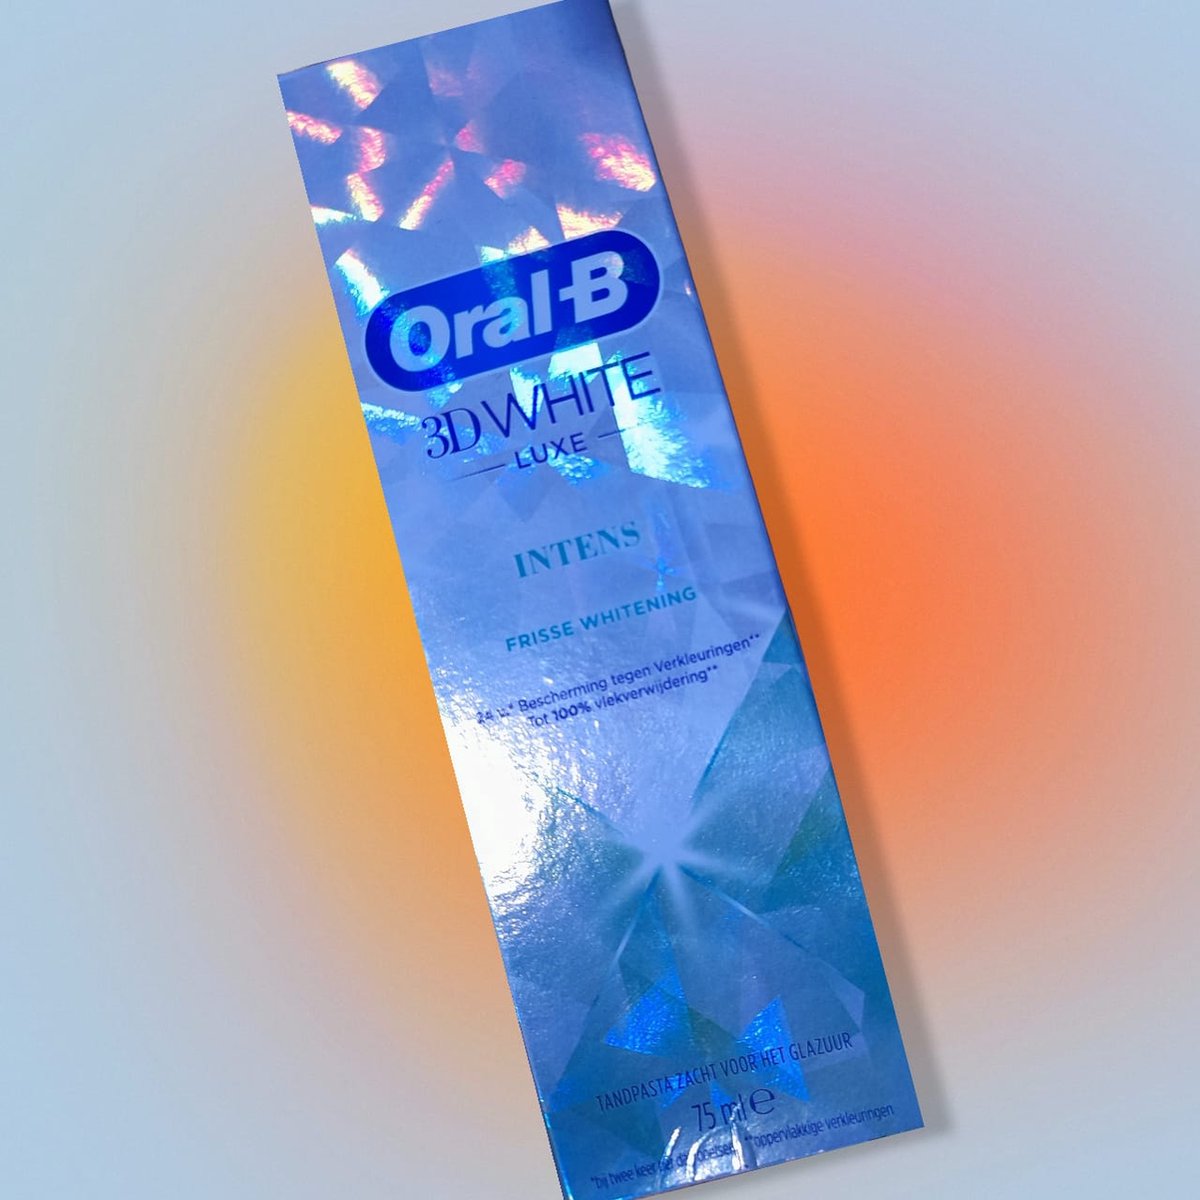 3 X Oral-B WHITE LUXE INTENS Tandpasta Special Edition Hologram verpakking Per 3 geleverd